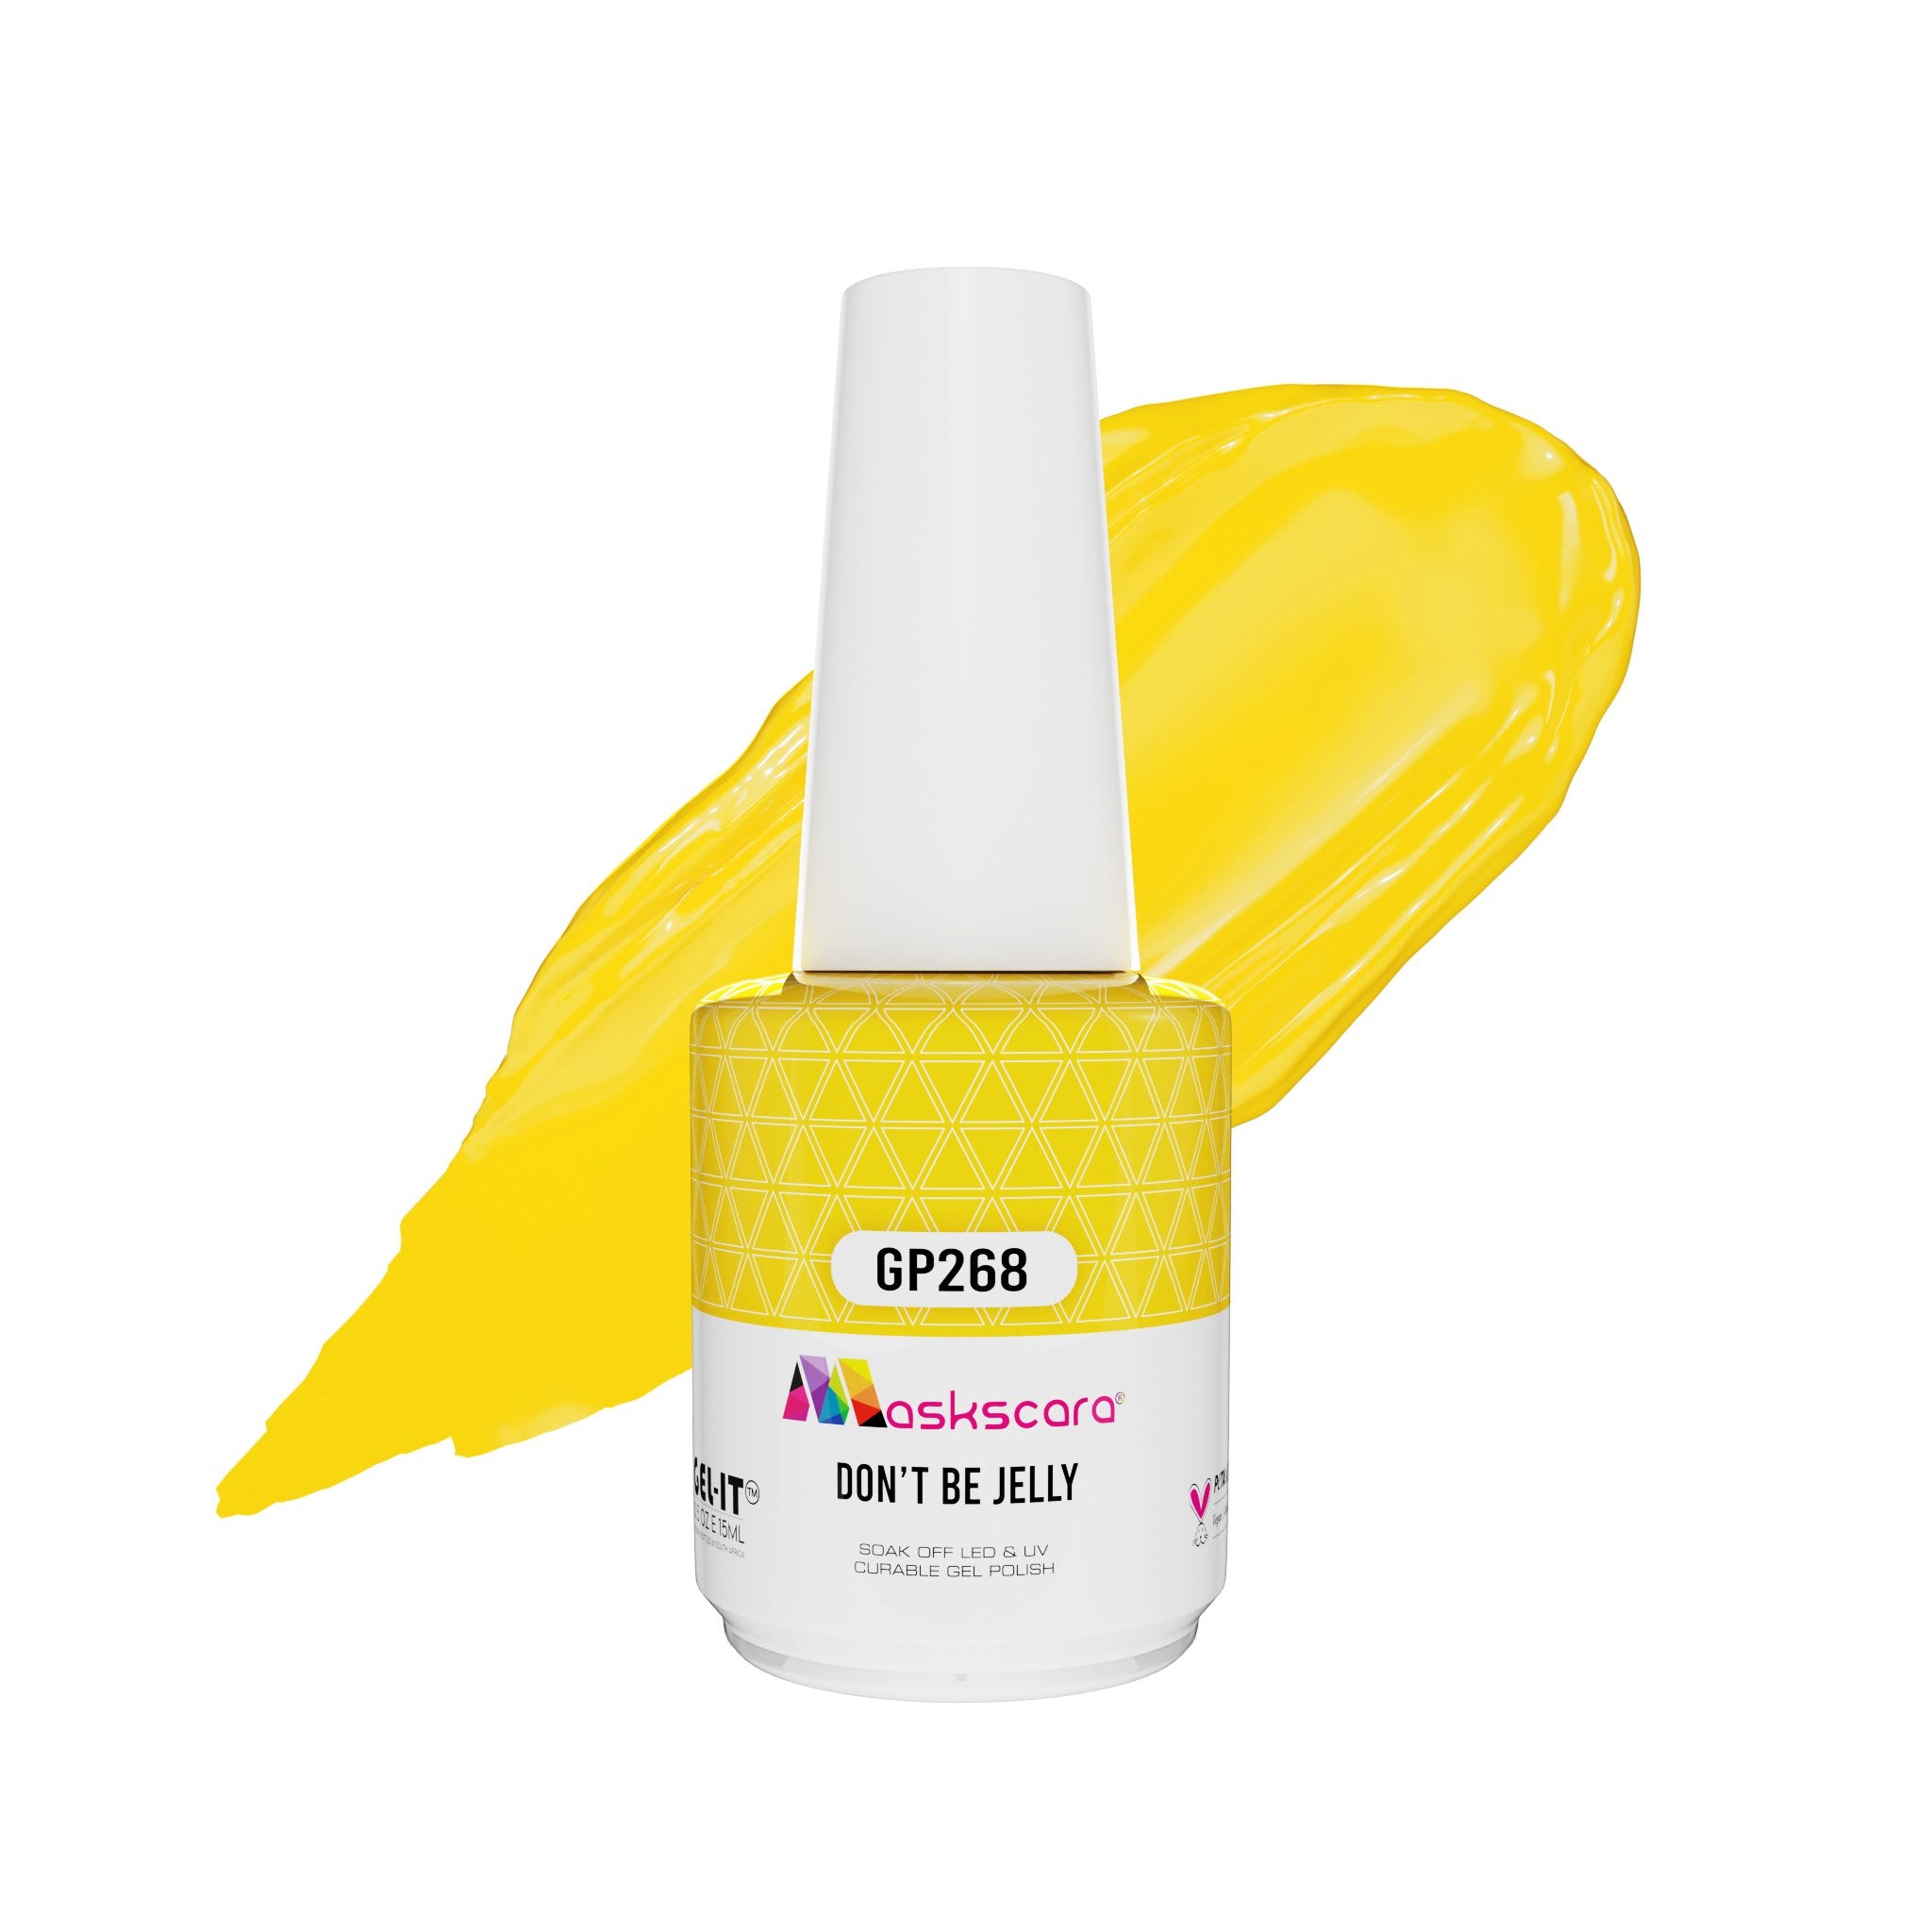 <img scr = “ GP26 Don't Be Jelly.jpeg” alt = “Bright Yellow gel polish colour by the brand Maskscara”>